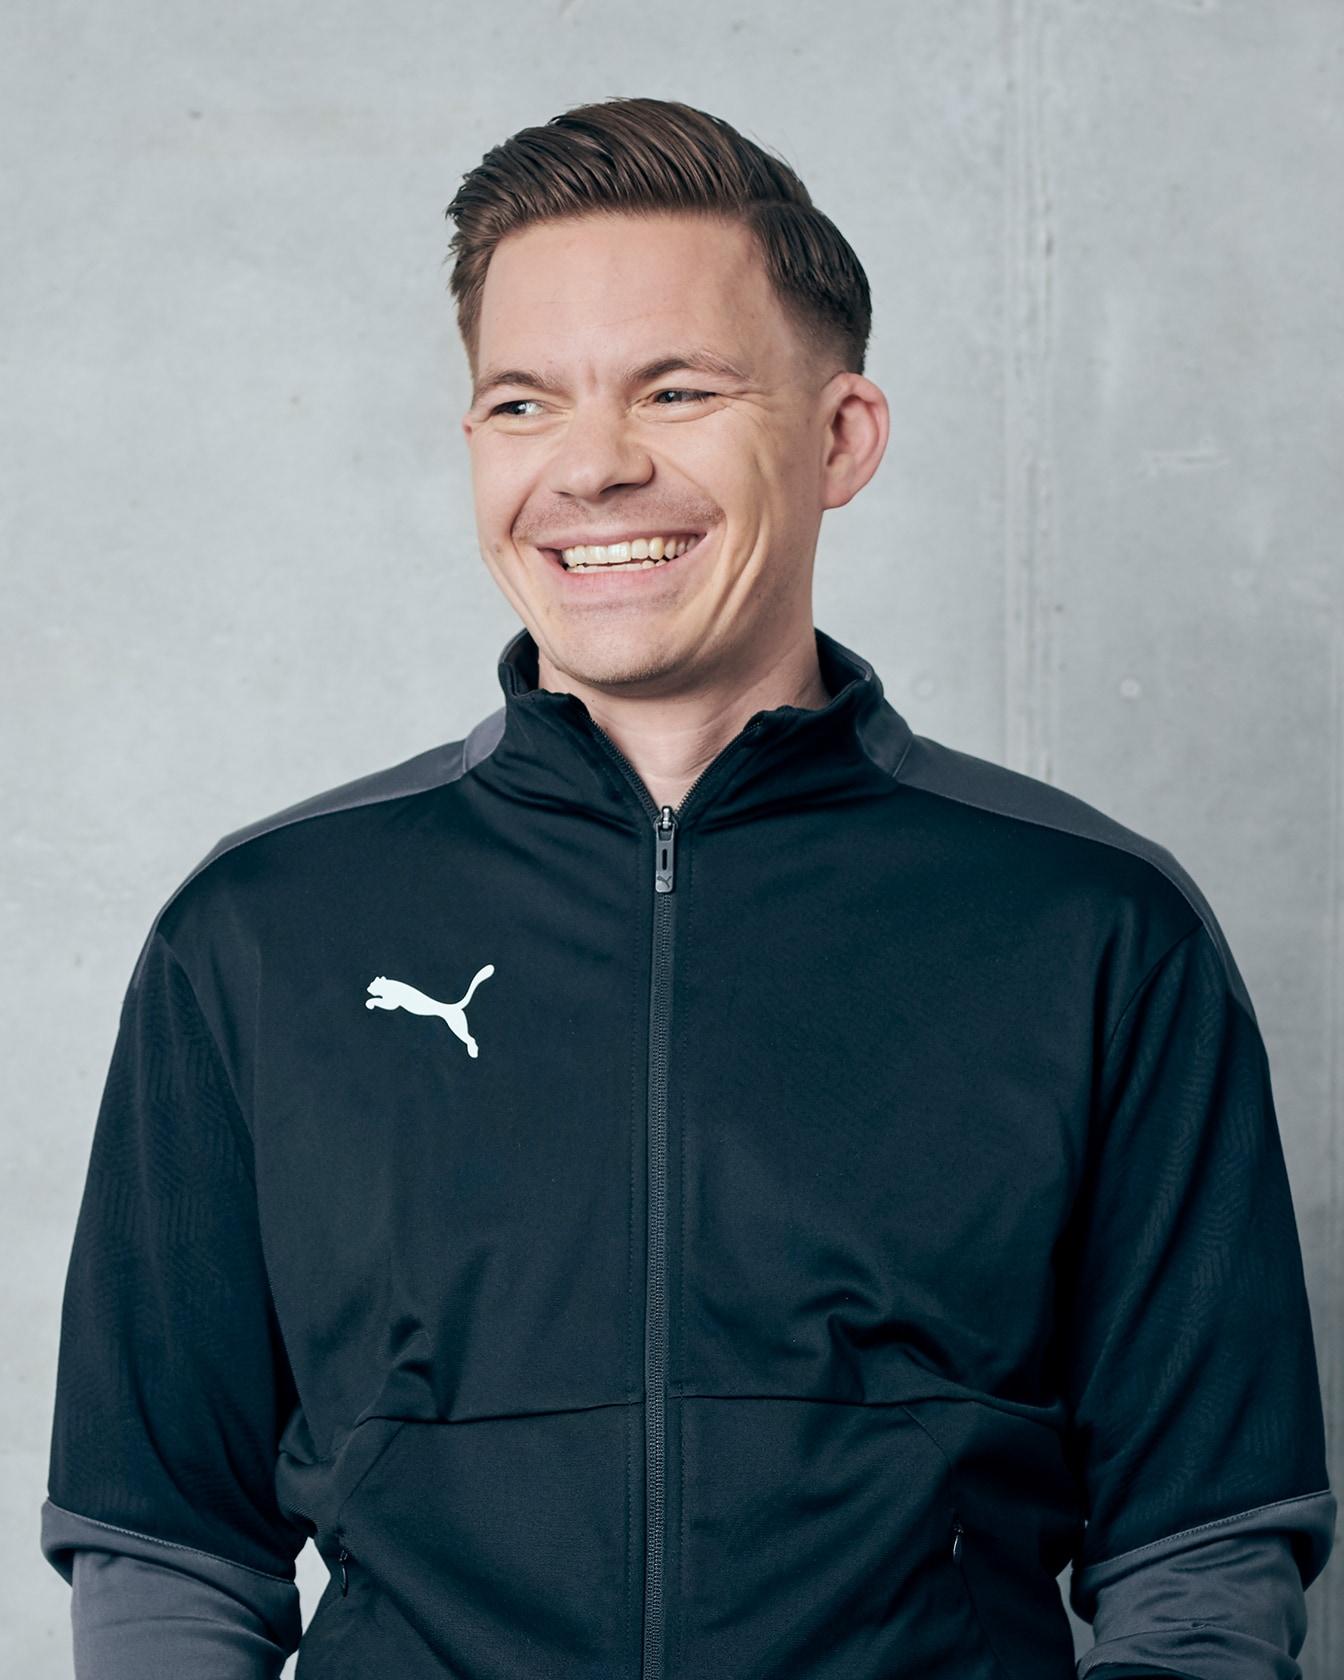 PUMA employee Gary smiling with a black jacket